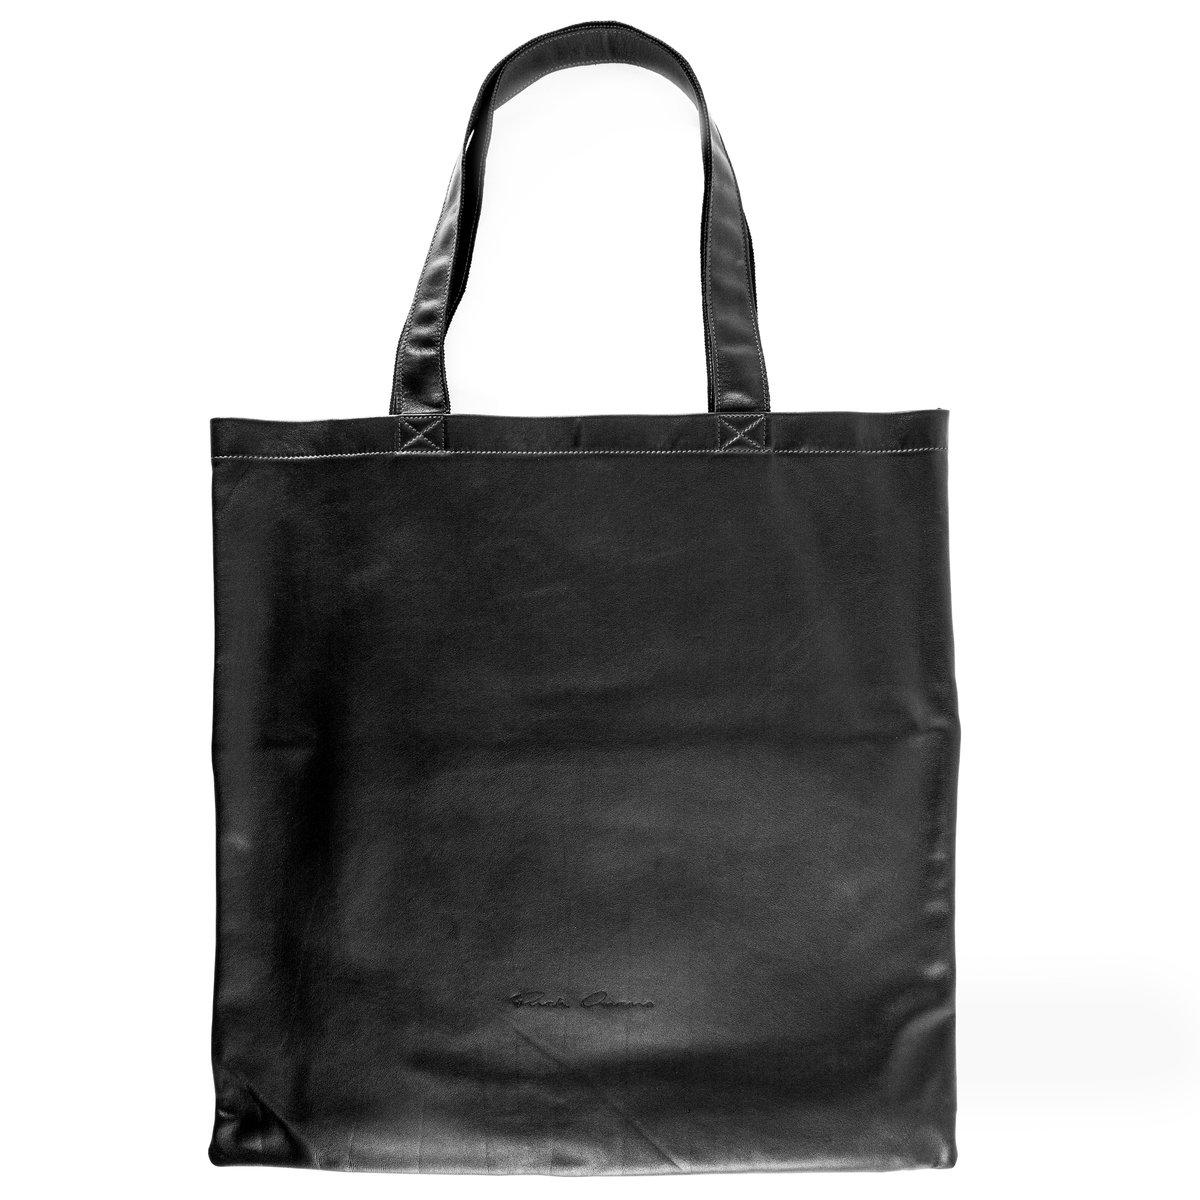 Rick Owens Large Signature Leather Tote Bag in Black - Lyst